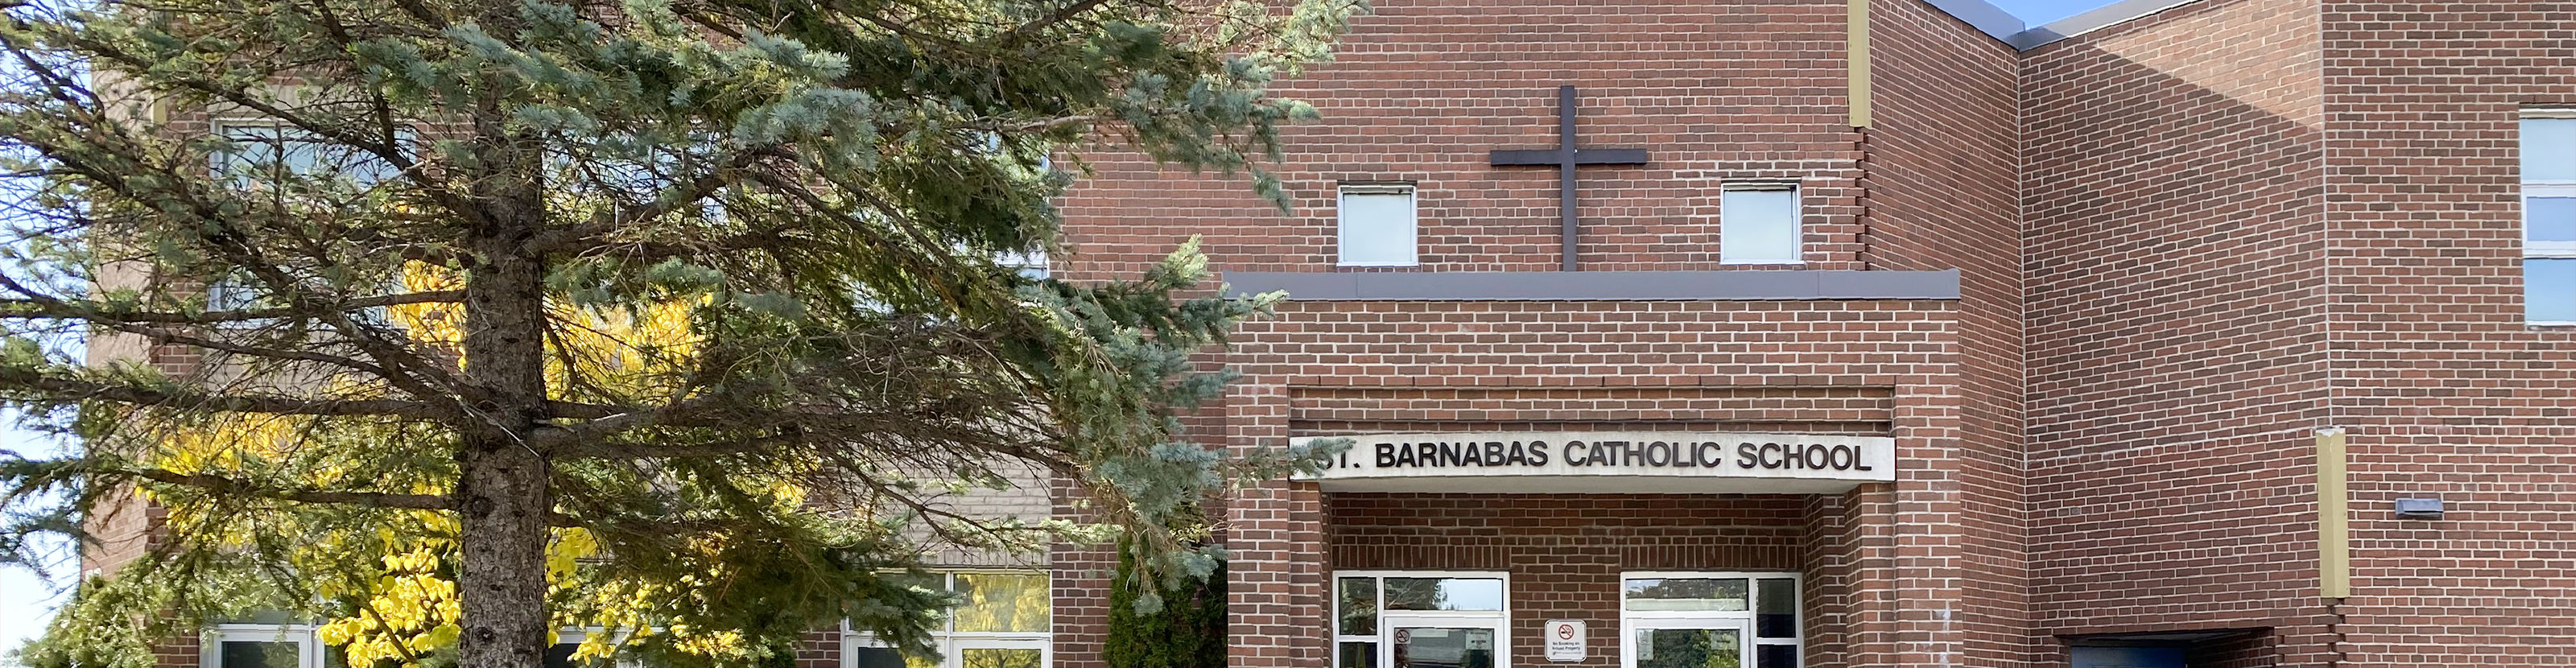 The front of the St. Barnabas Catholic School building.